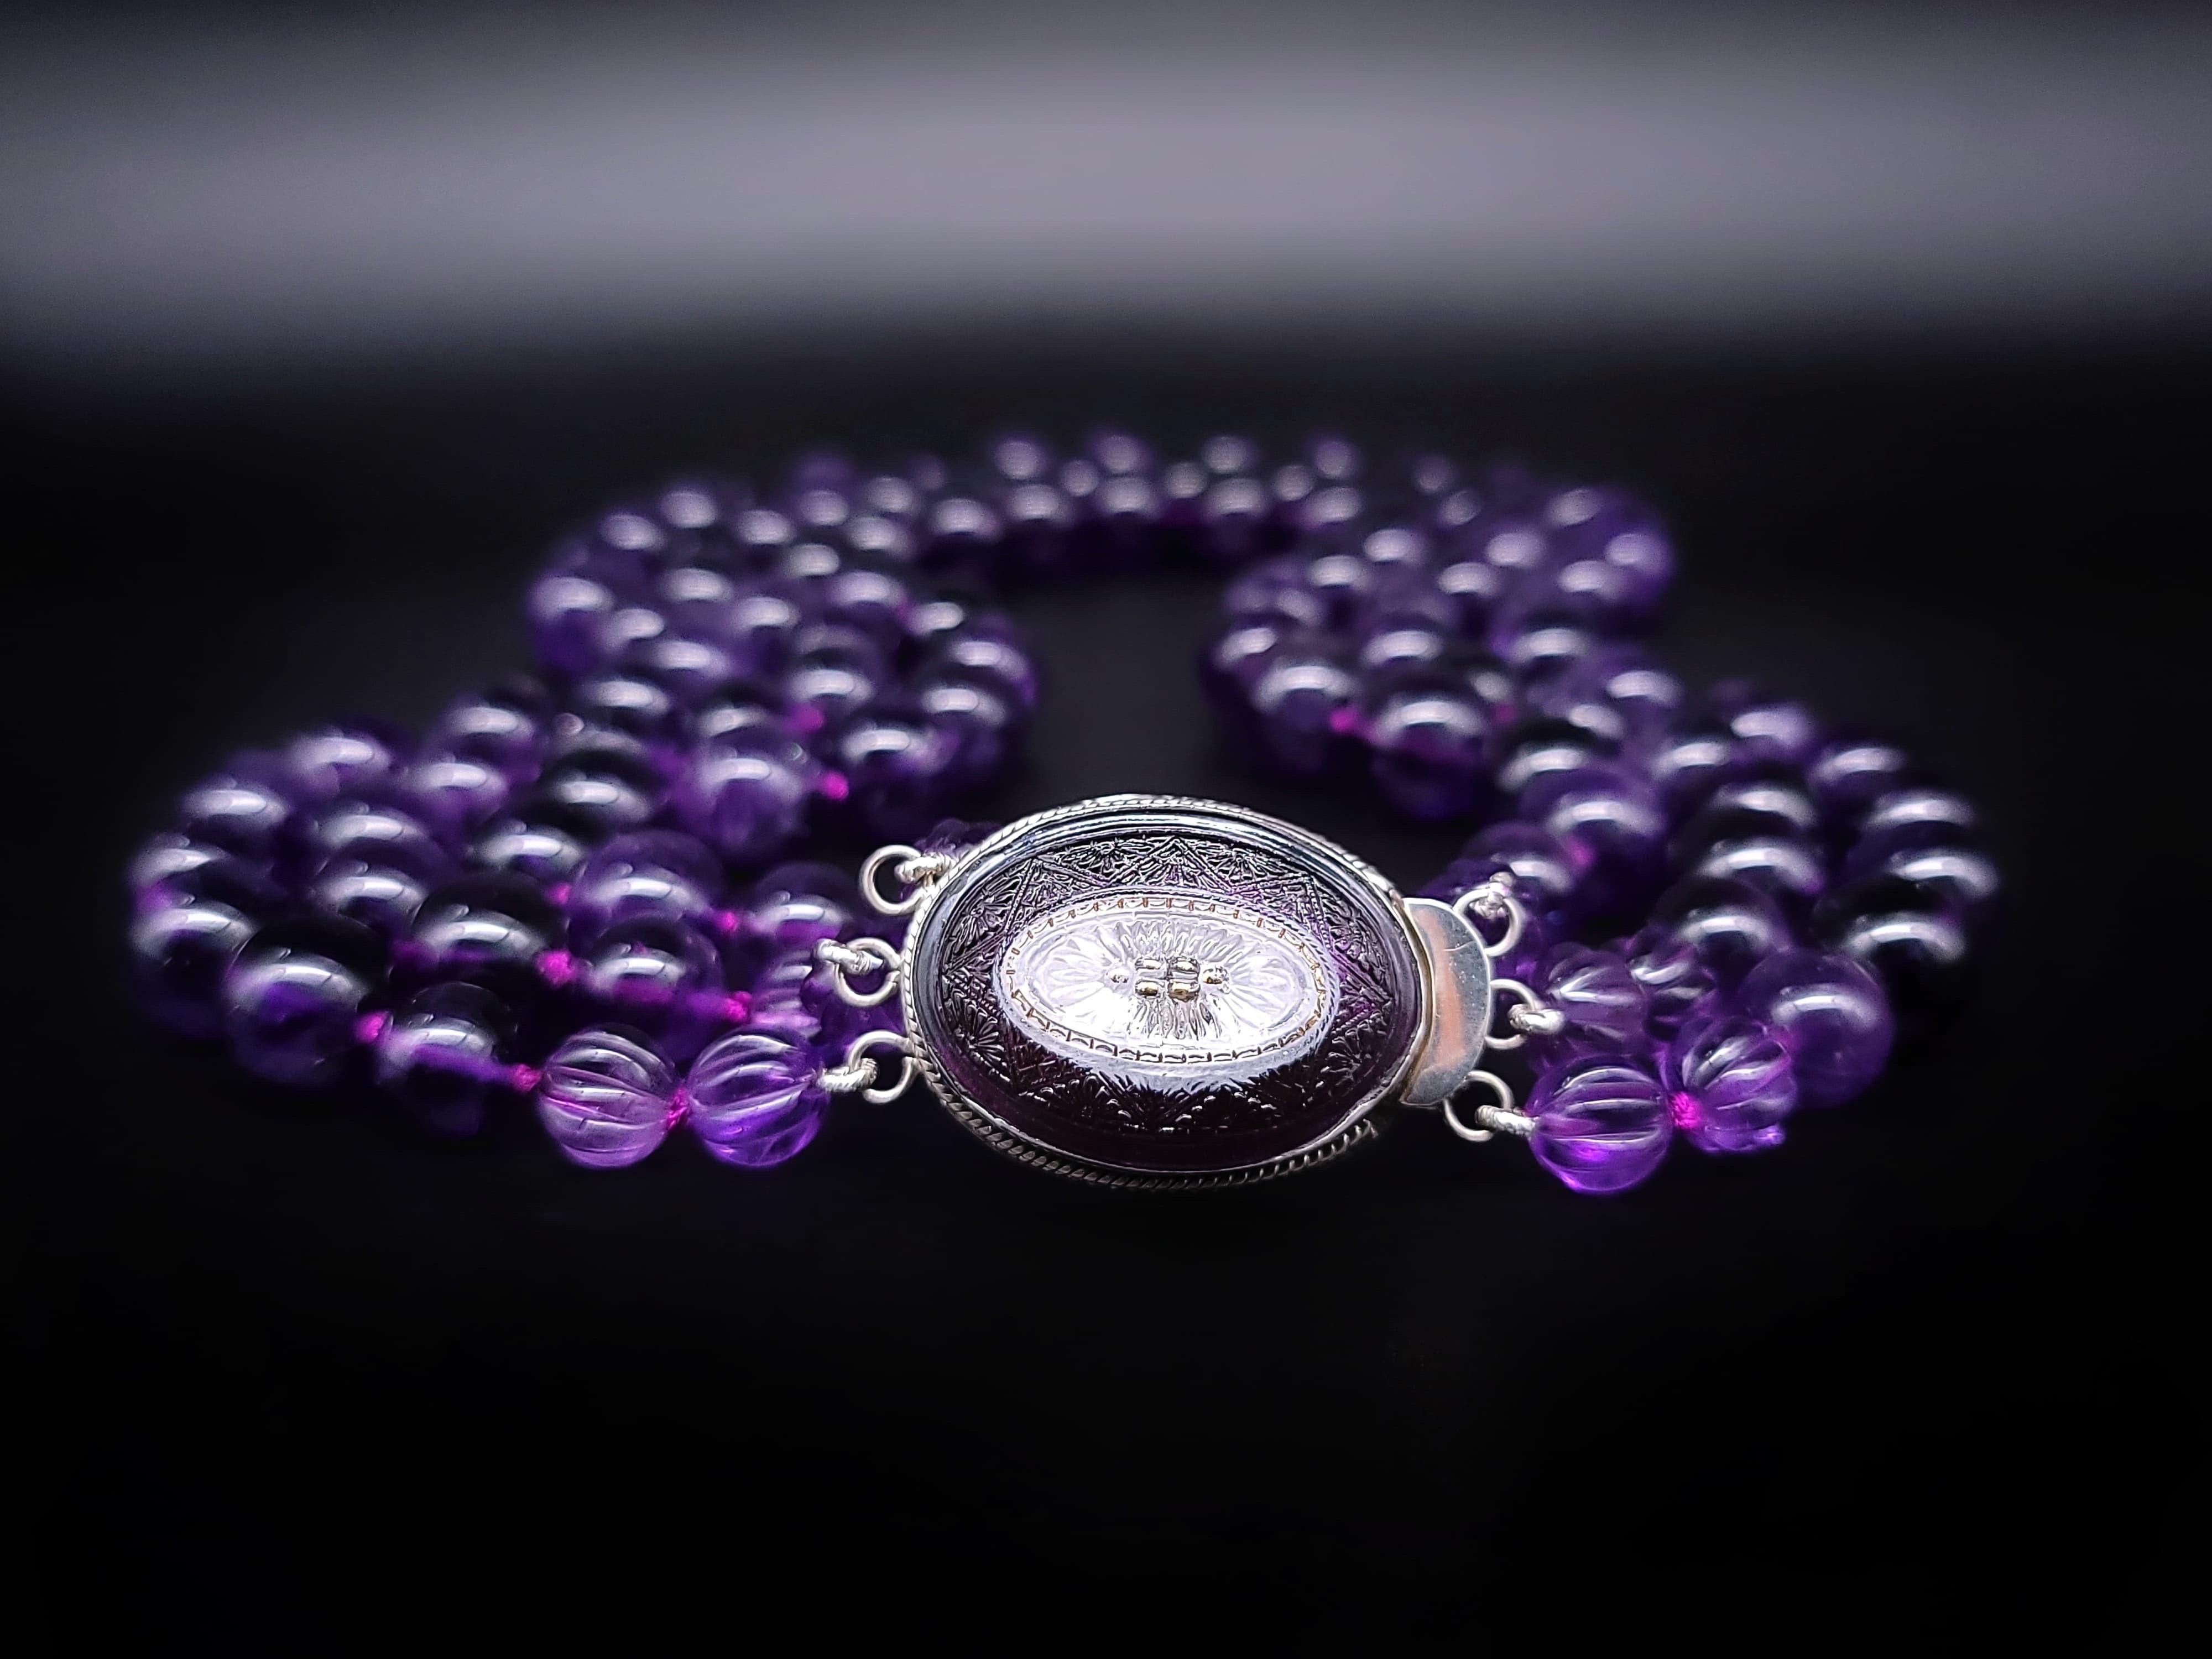 A.Jeschel  Amethyst necklace with a Vintage Venetian glass clasp. 7